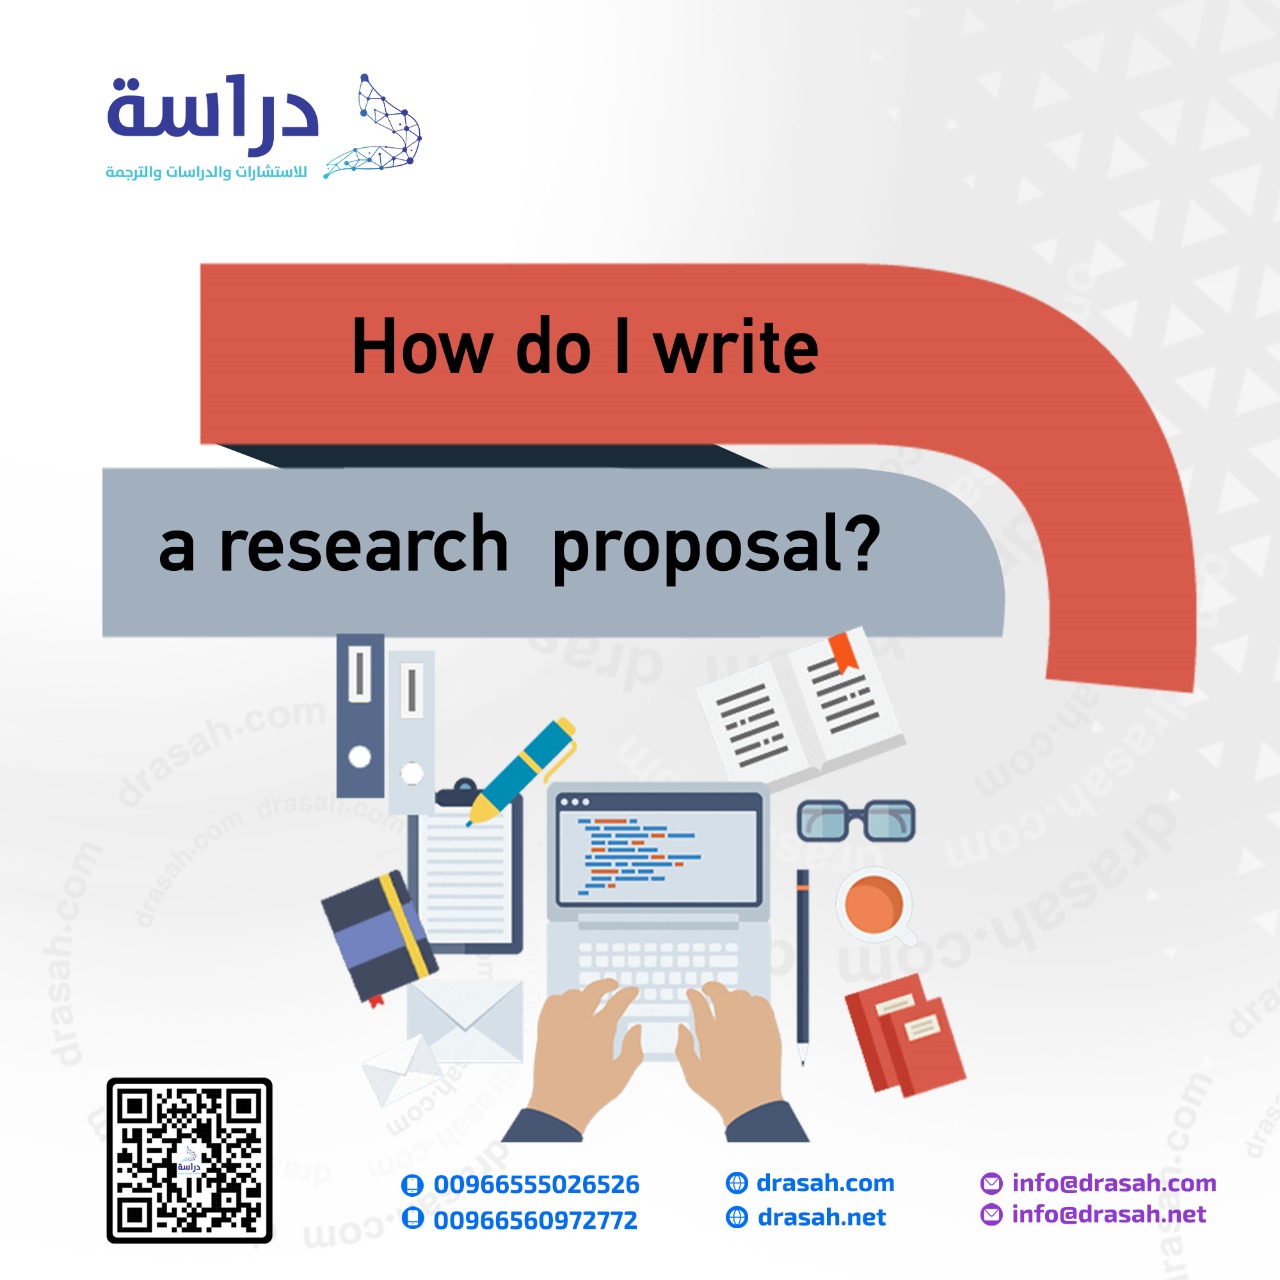 How do I write a research proposal?